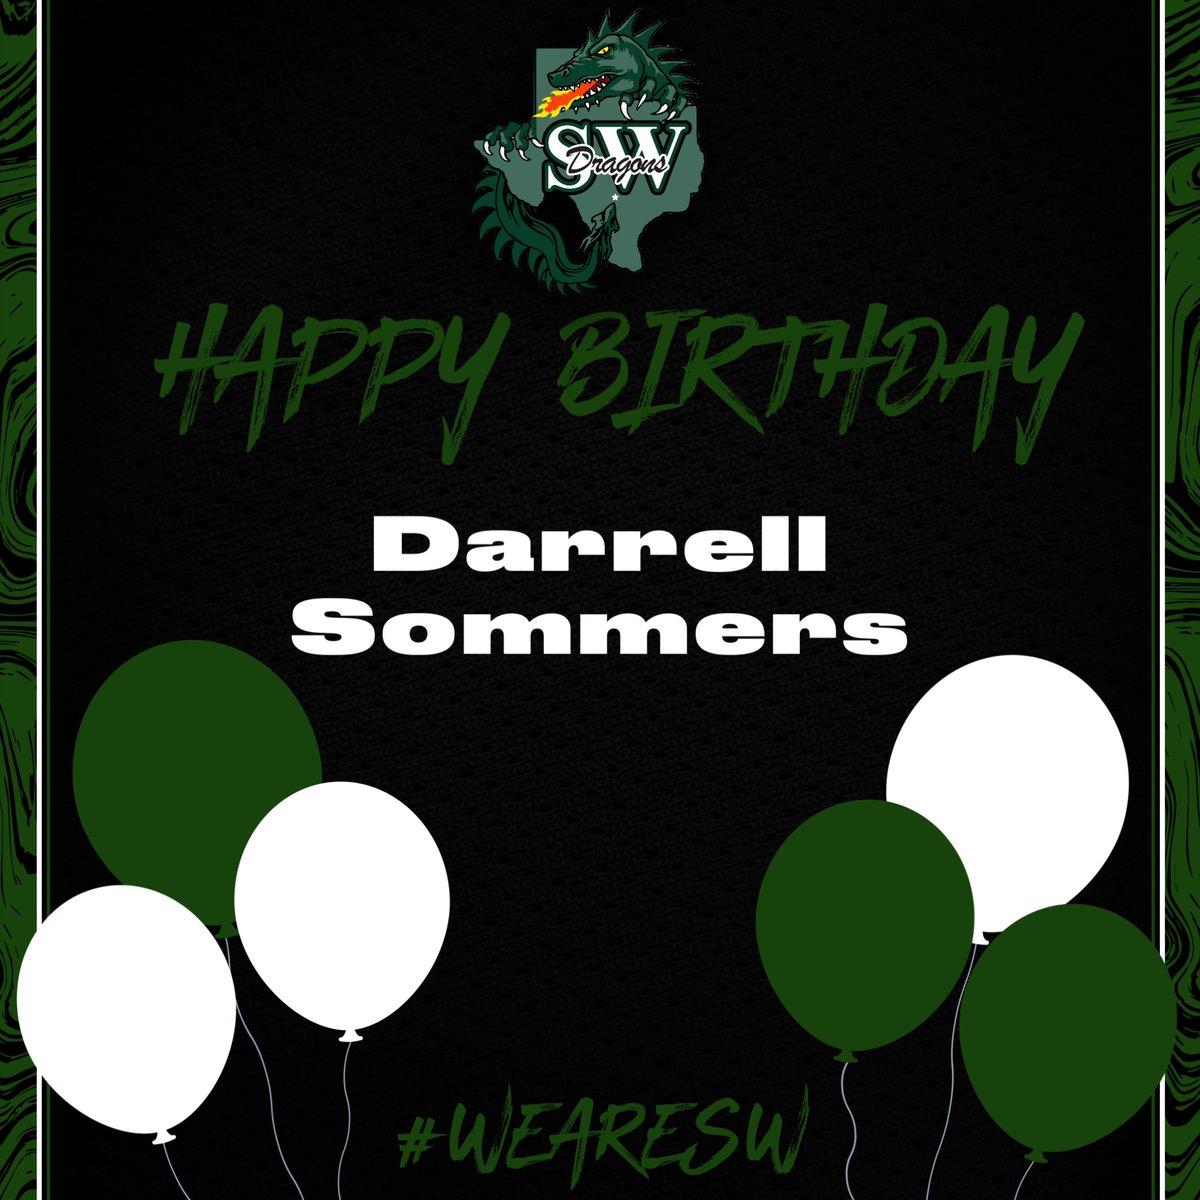 Happy Birthday Darrell Sommers!! #WeAreSW #DragonPride #OWOH #AAAO